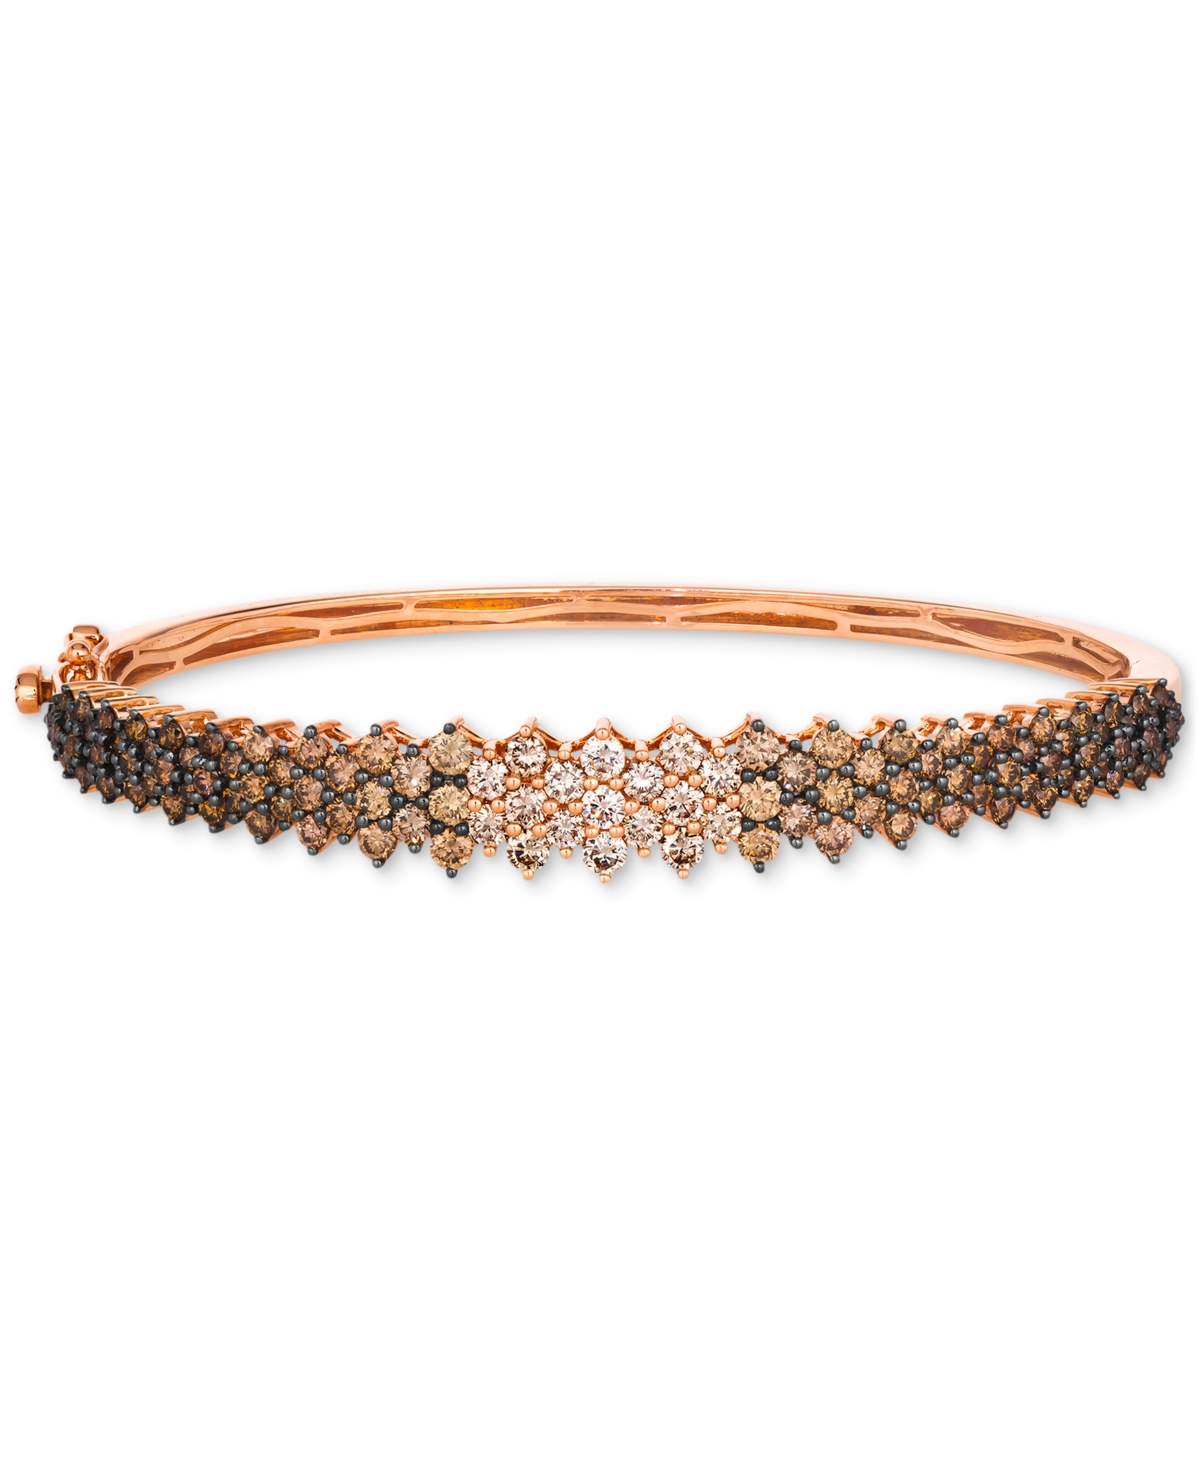 Ombre Chocolate Ombre Diamond Cluster Bangle Bracelet (3-1/2 ct. t.w.) in 14k Rose Gold (Also Available in Yellow Gold or White Gold) - White